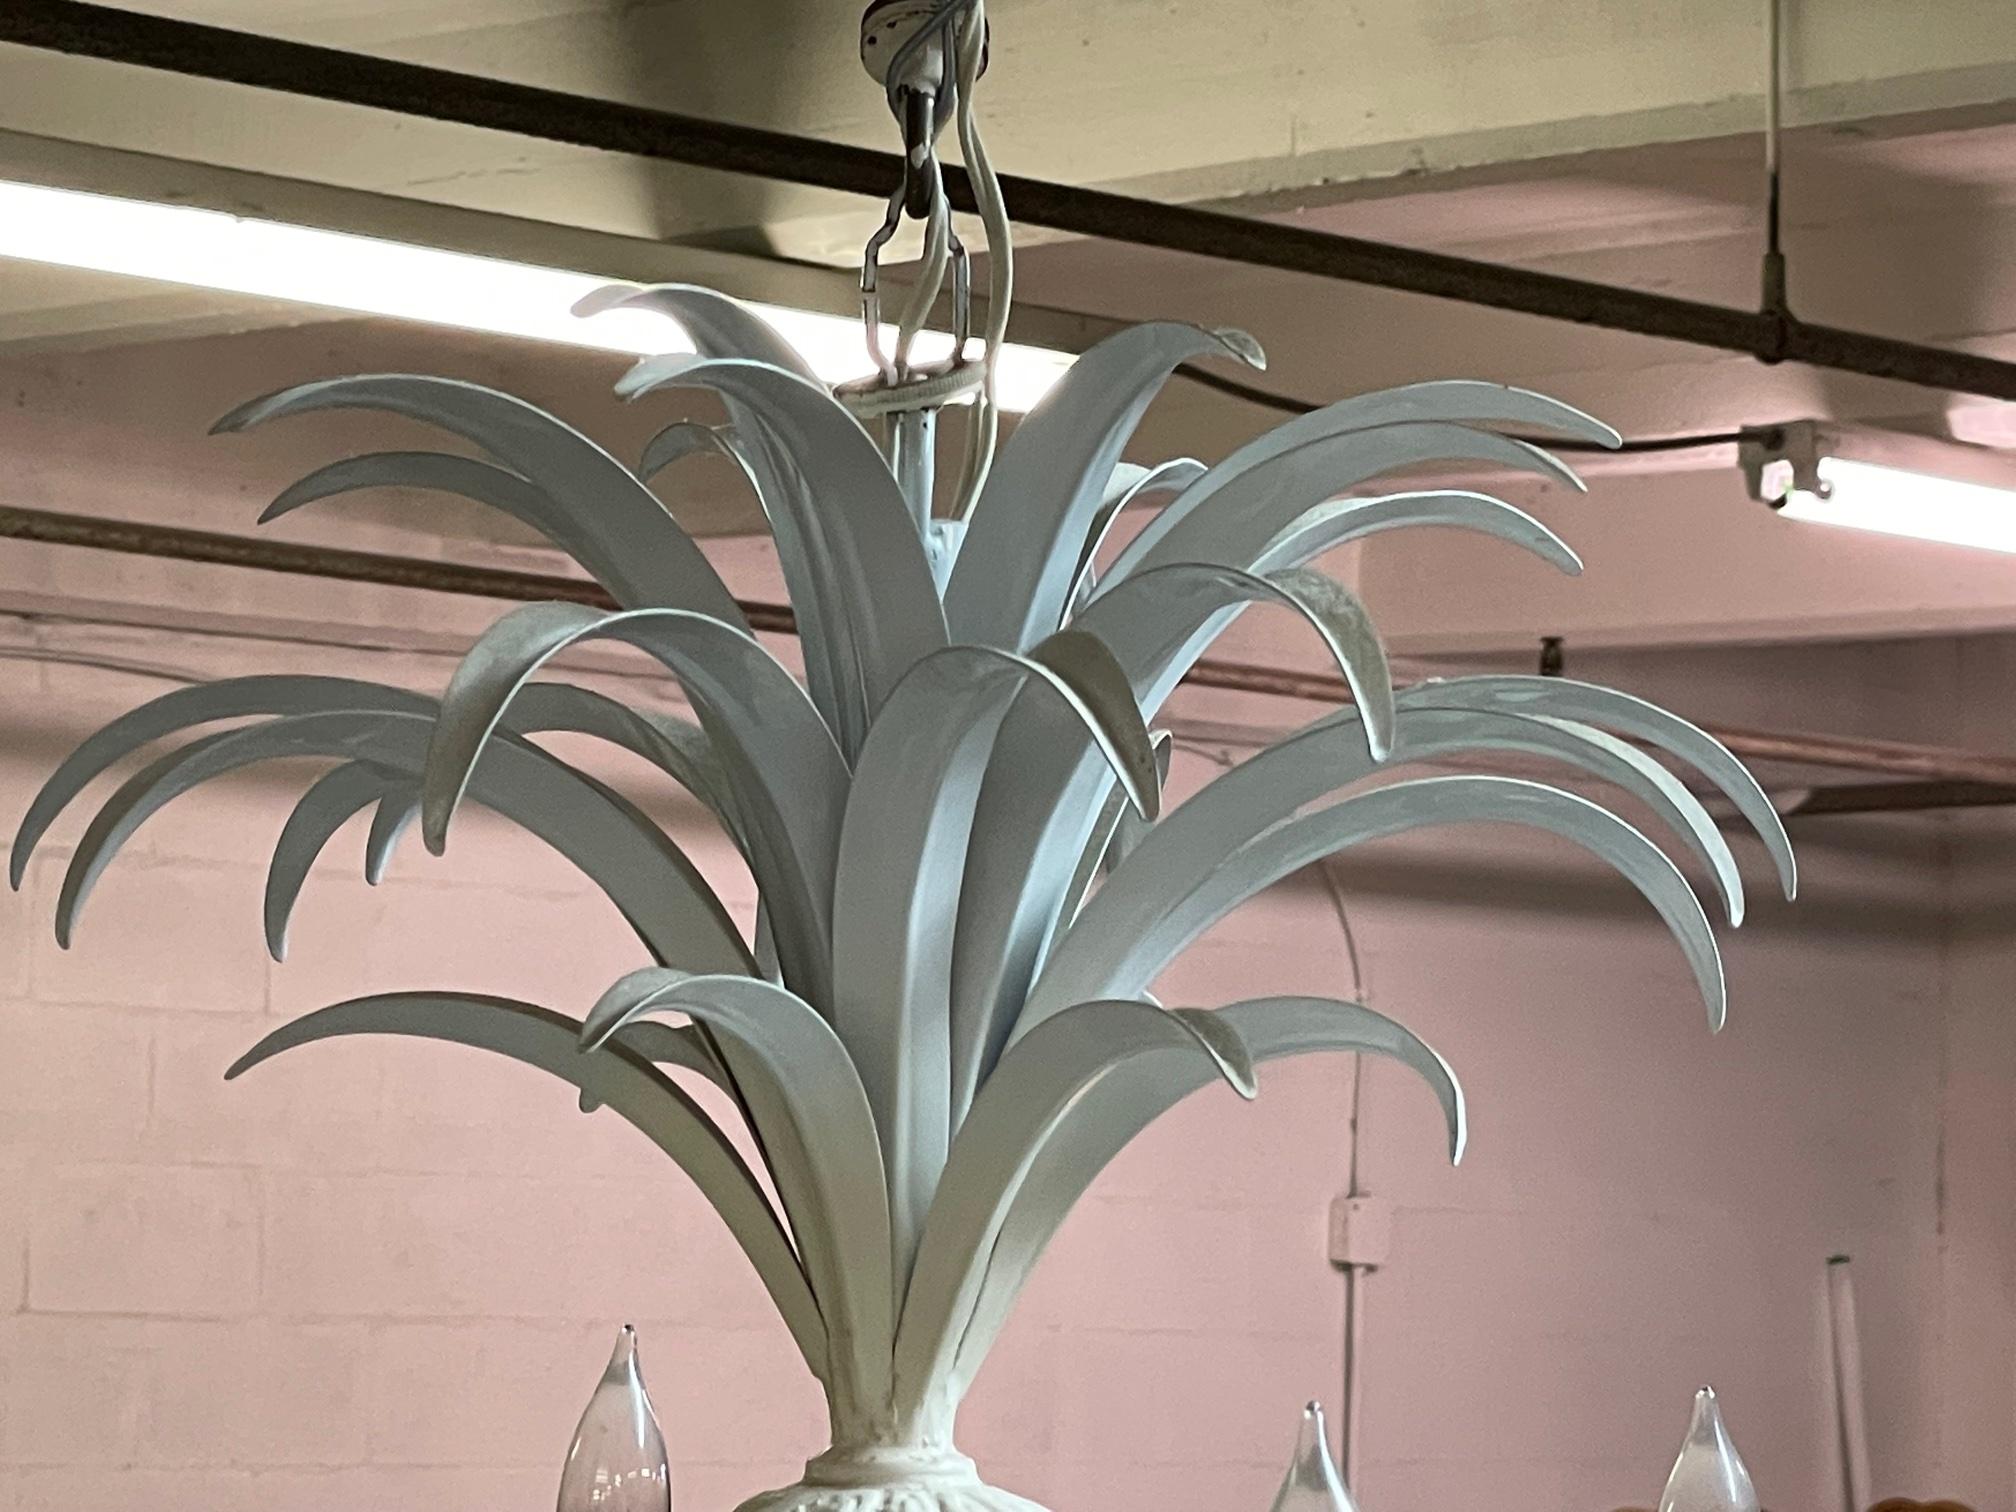 Vintage tole metal chandelier features tropical pineapple design and tole metal construction. Good condition with minor imperfections consistent with age.